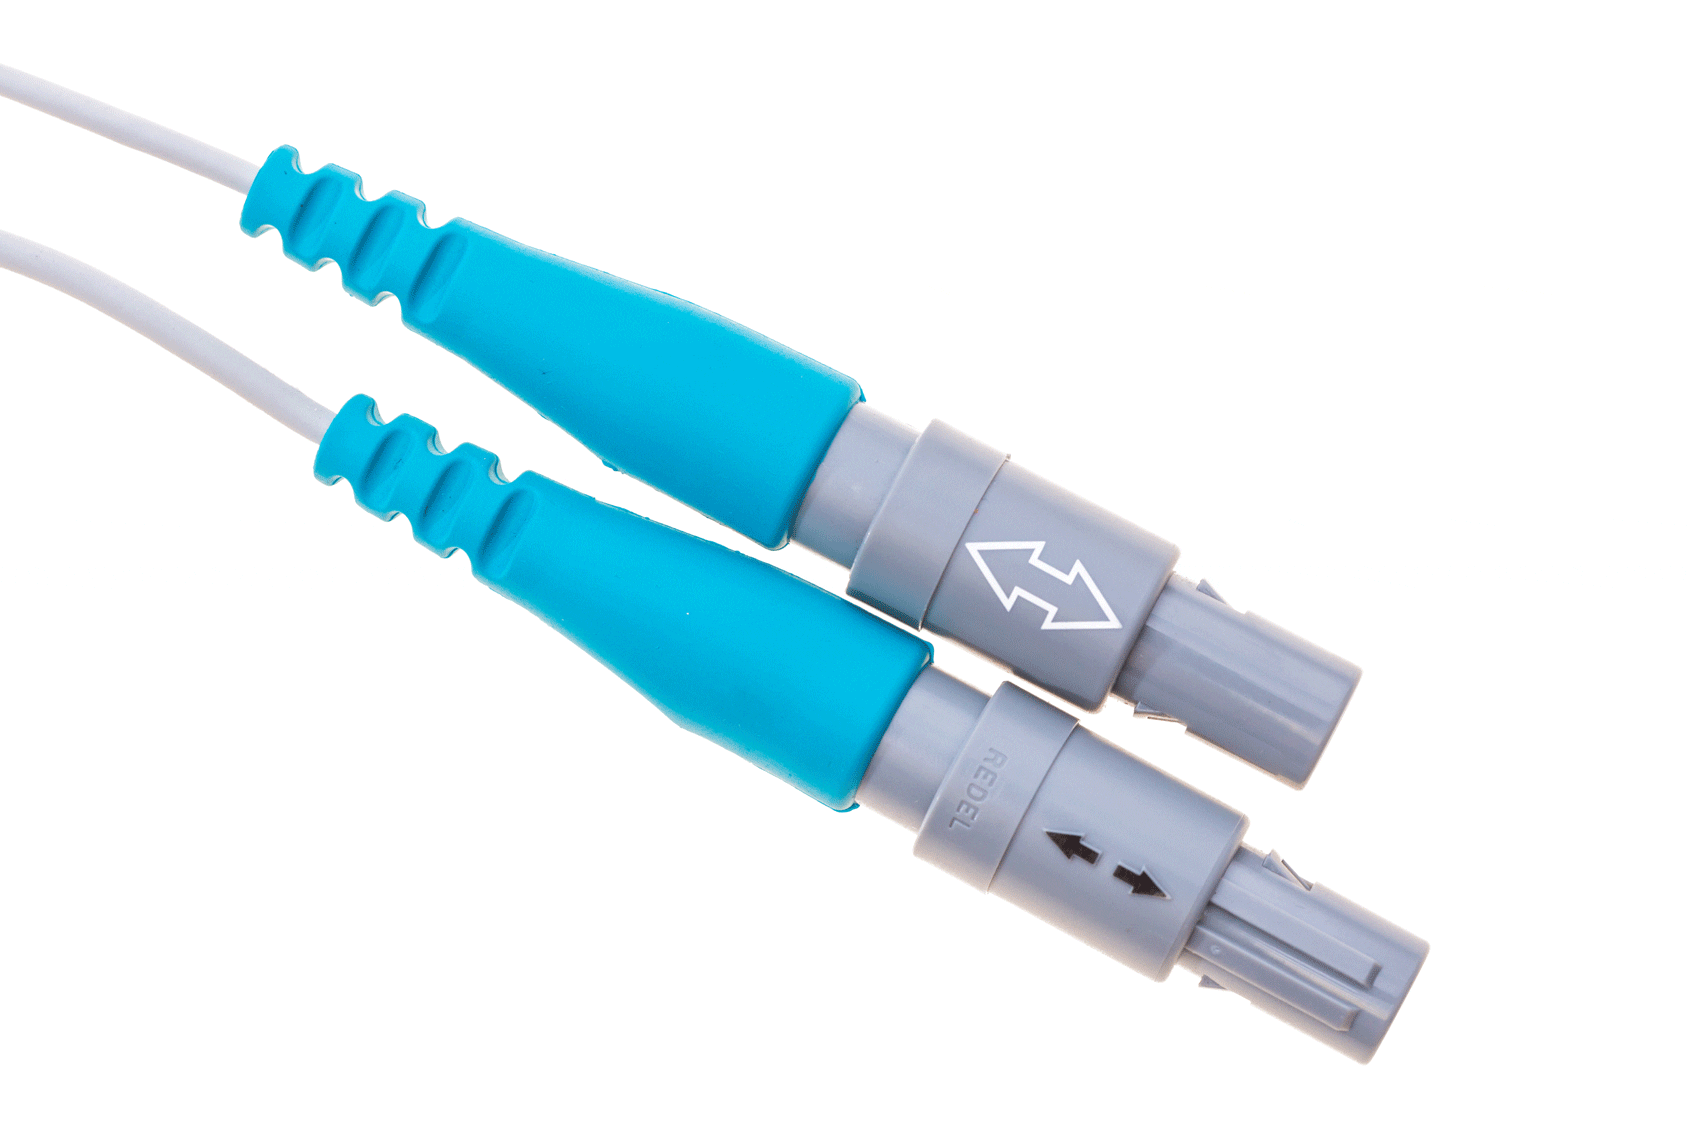 Northwire overmolded cables